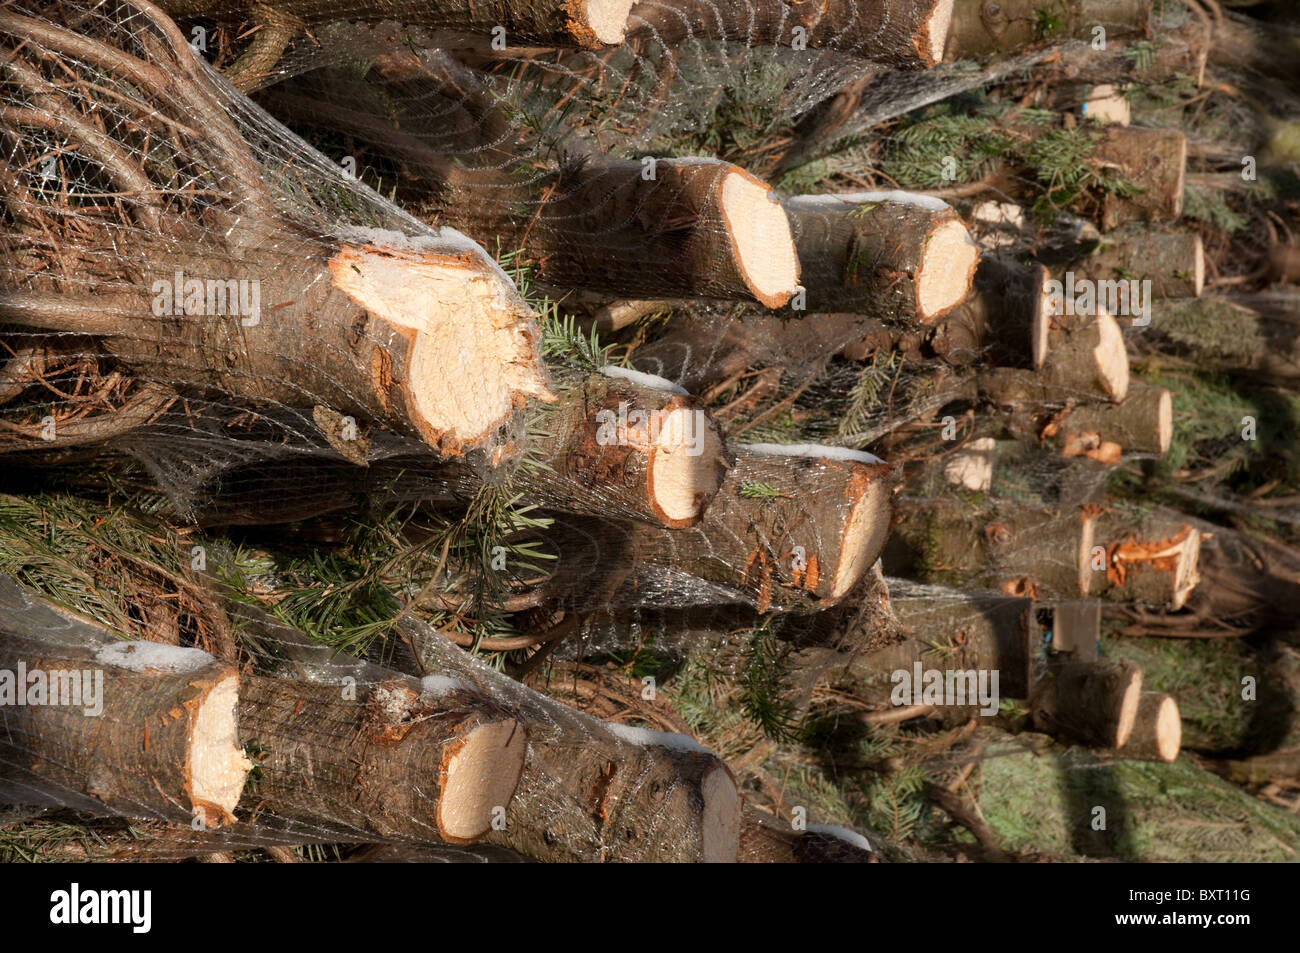 Freshly cut Christmas trees, Nordman Fir, netted and stacked on pallet awaiting transportation. Stock Photo